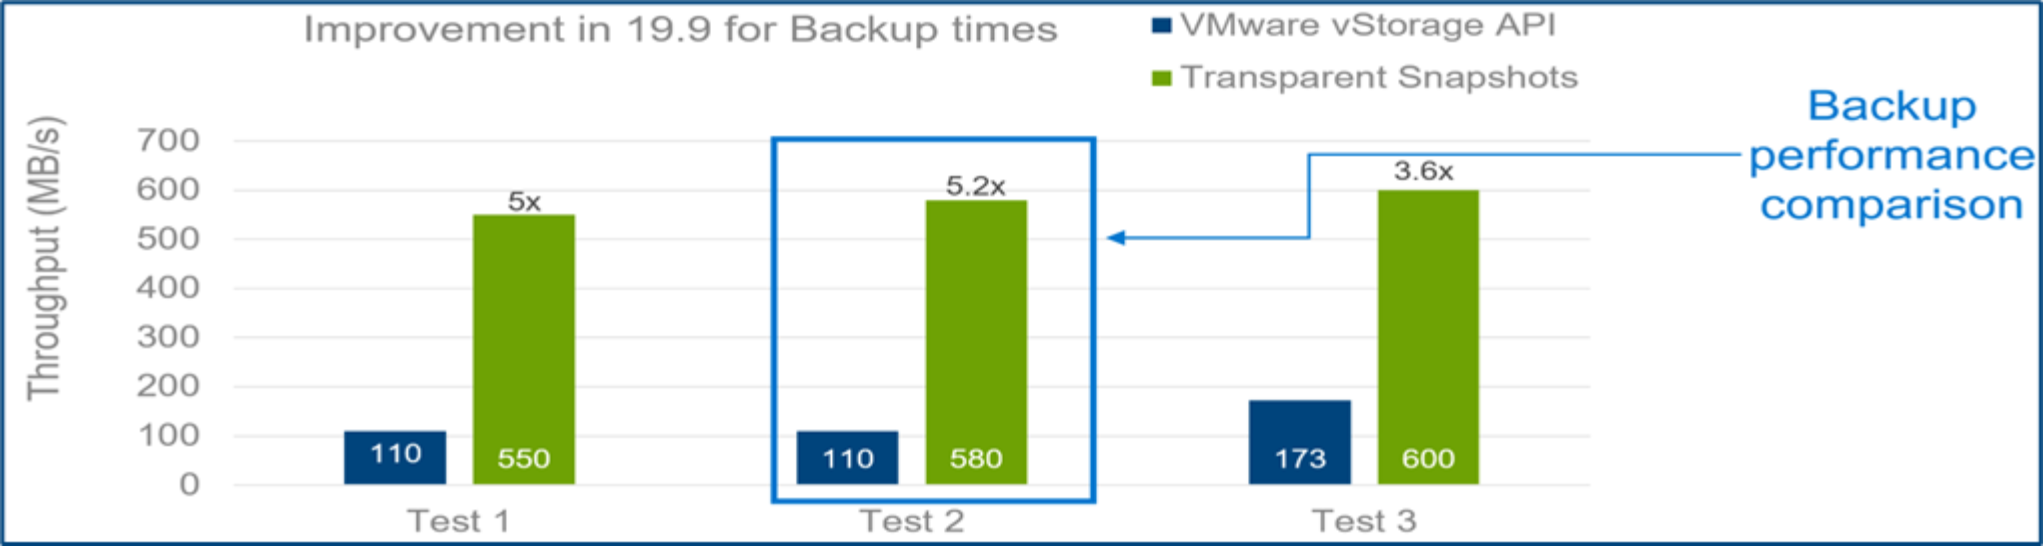 Improvement in backup time with Transparent Snapshots and with vADP